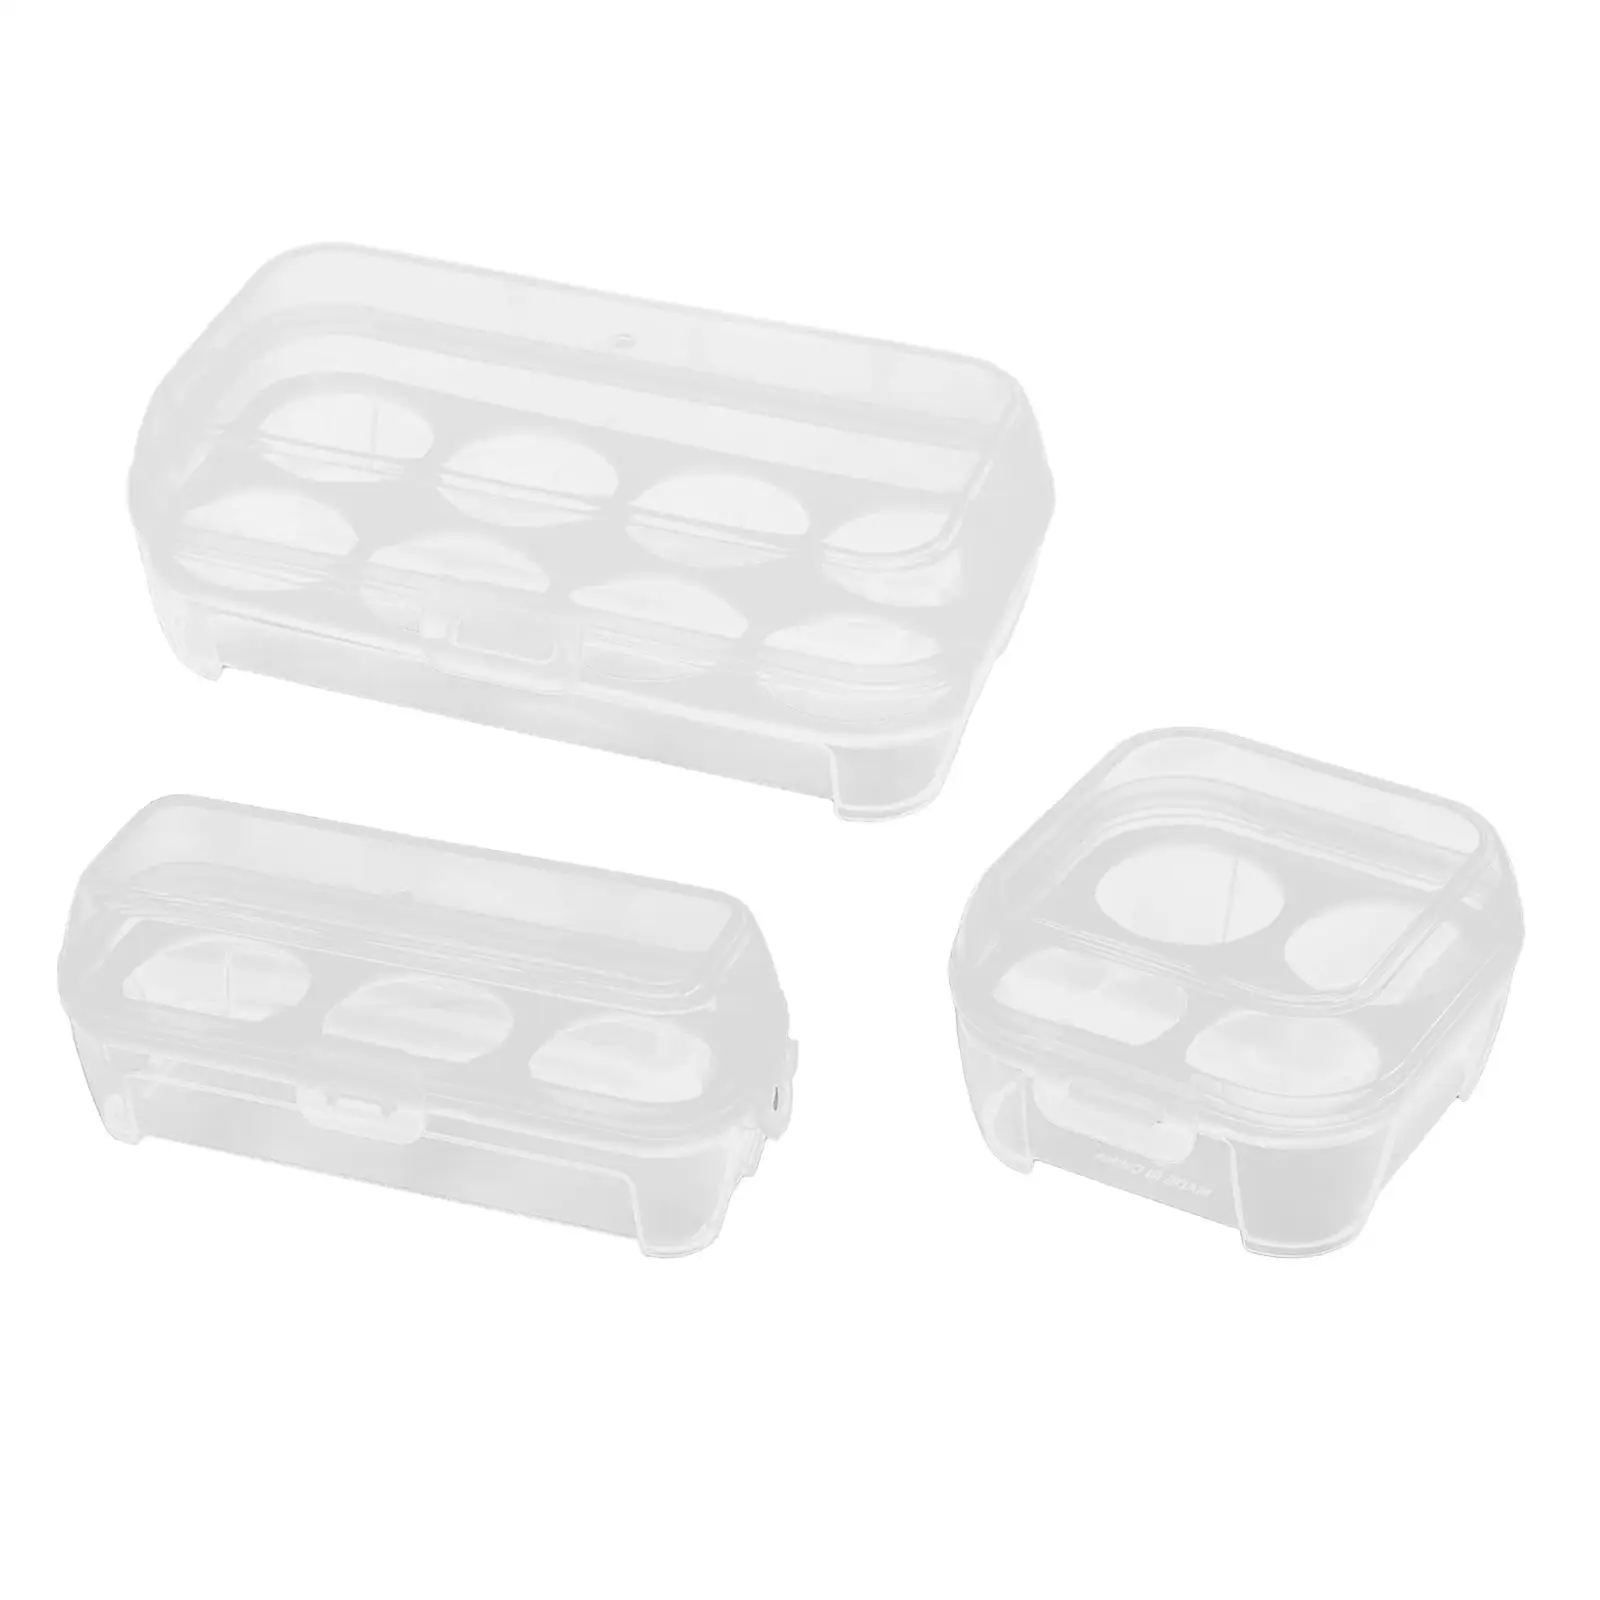 Egg Container Case Portable Outdoor Home Shockproof Leakproof Egg Storage Box